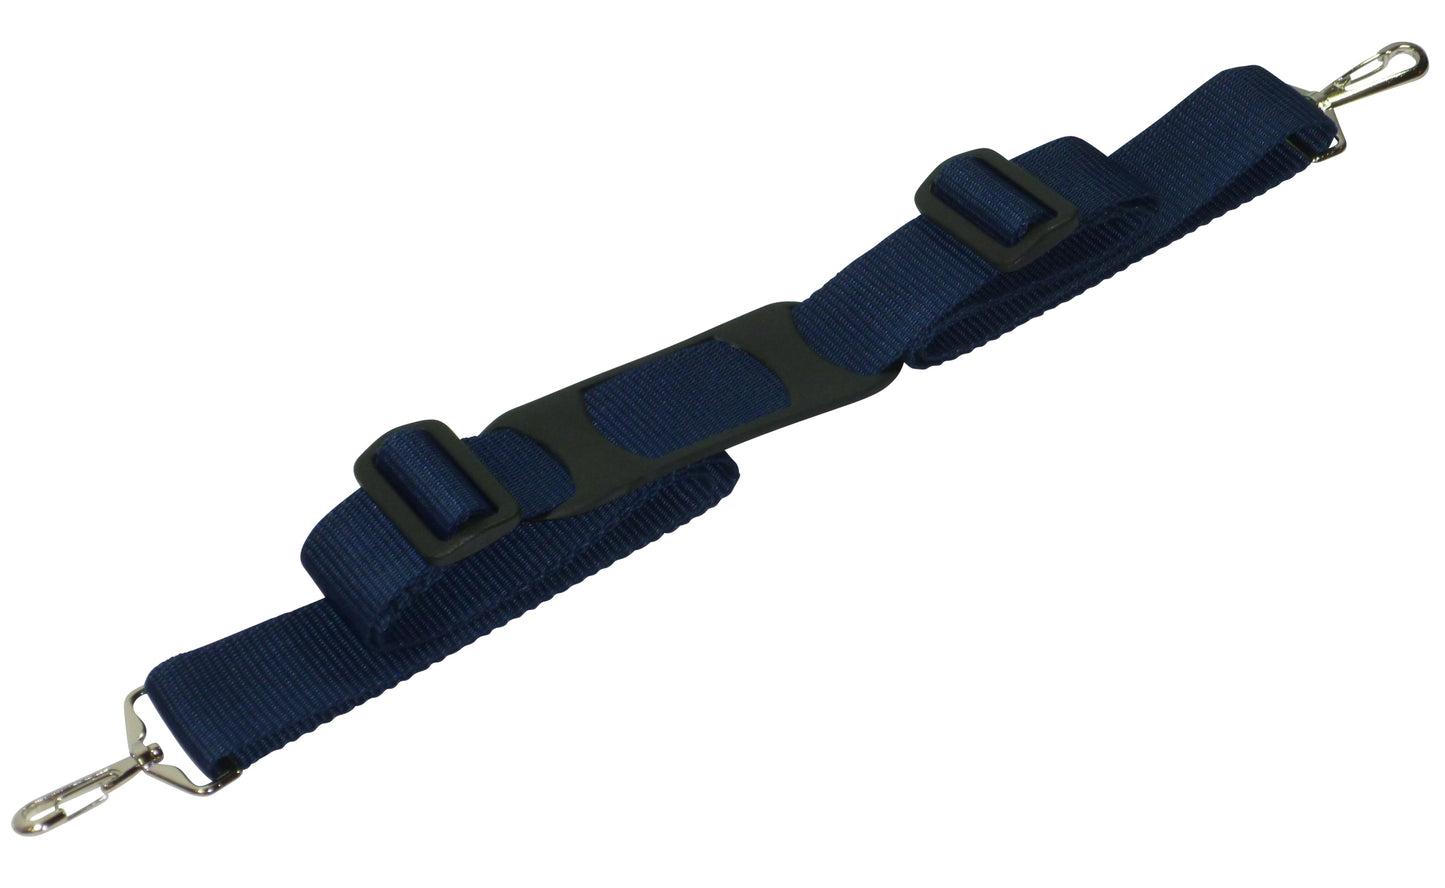 38mm Bag Strap with Metal Buckles and Shoulder Pad, 150cm in navy blue